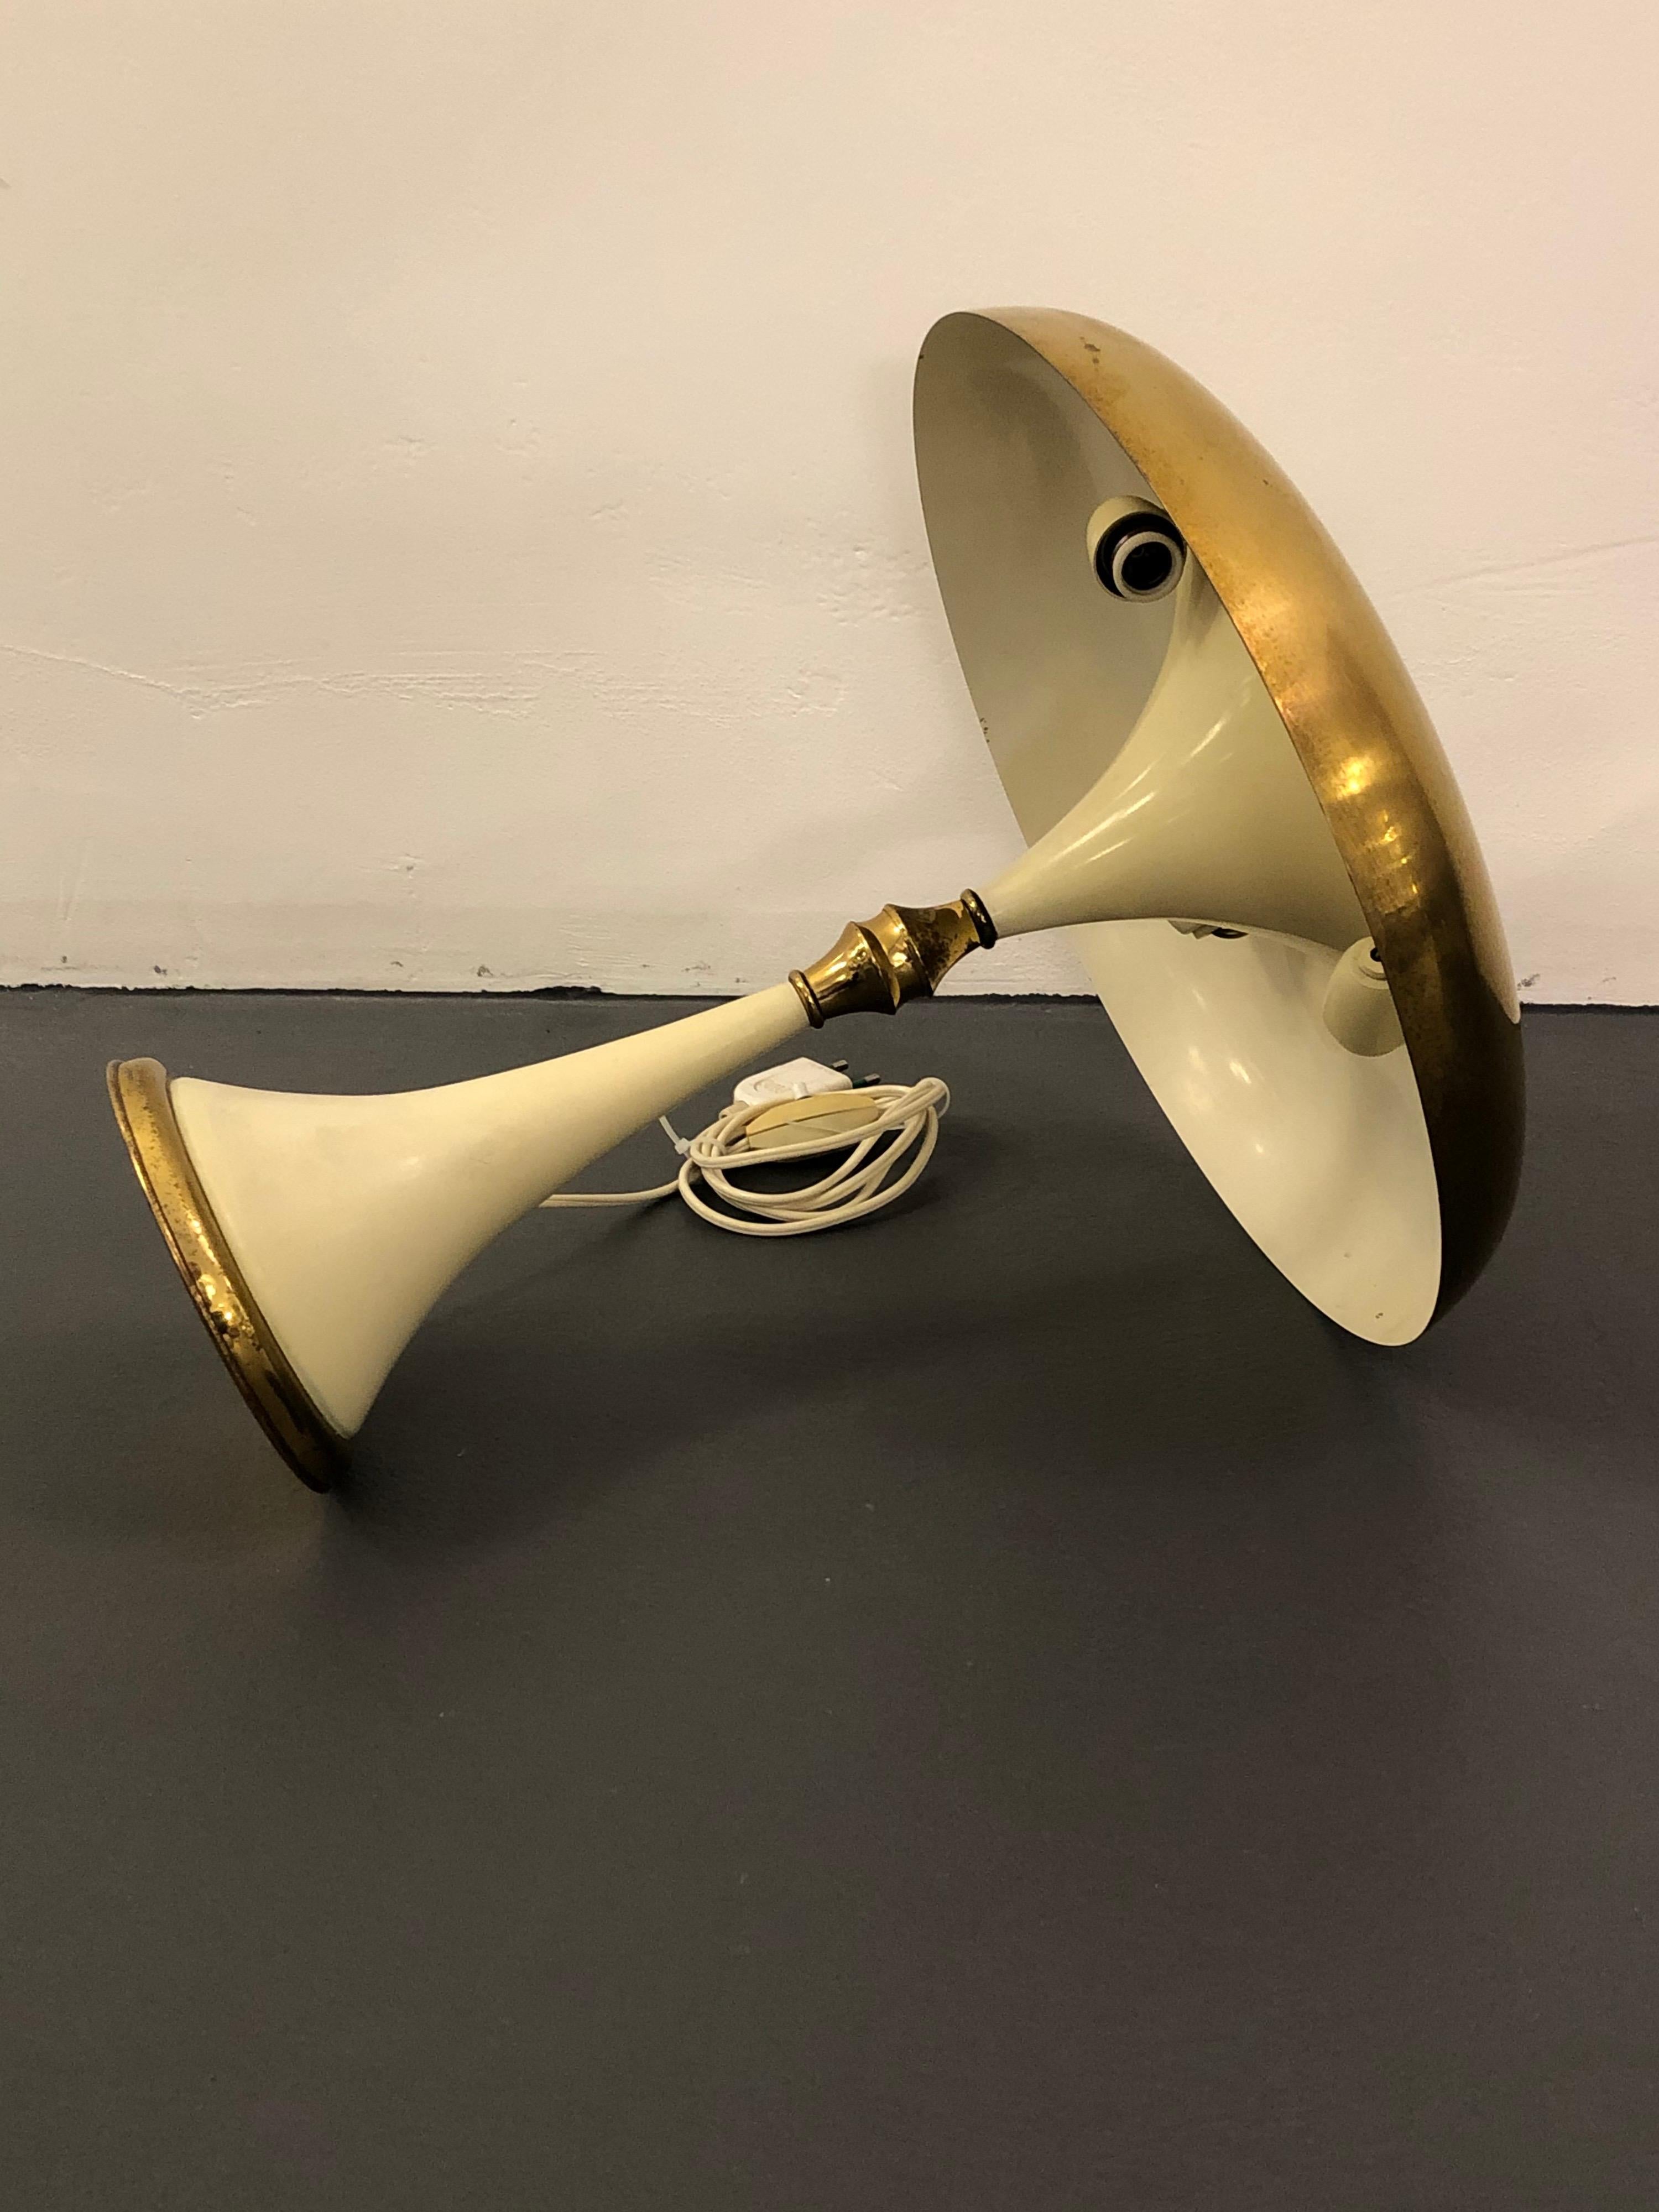 20th Century Midcentury Brass and Lacquer Table Lamp by Oscar Torlasco for Lumi, 1950s For Sale